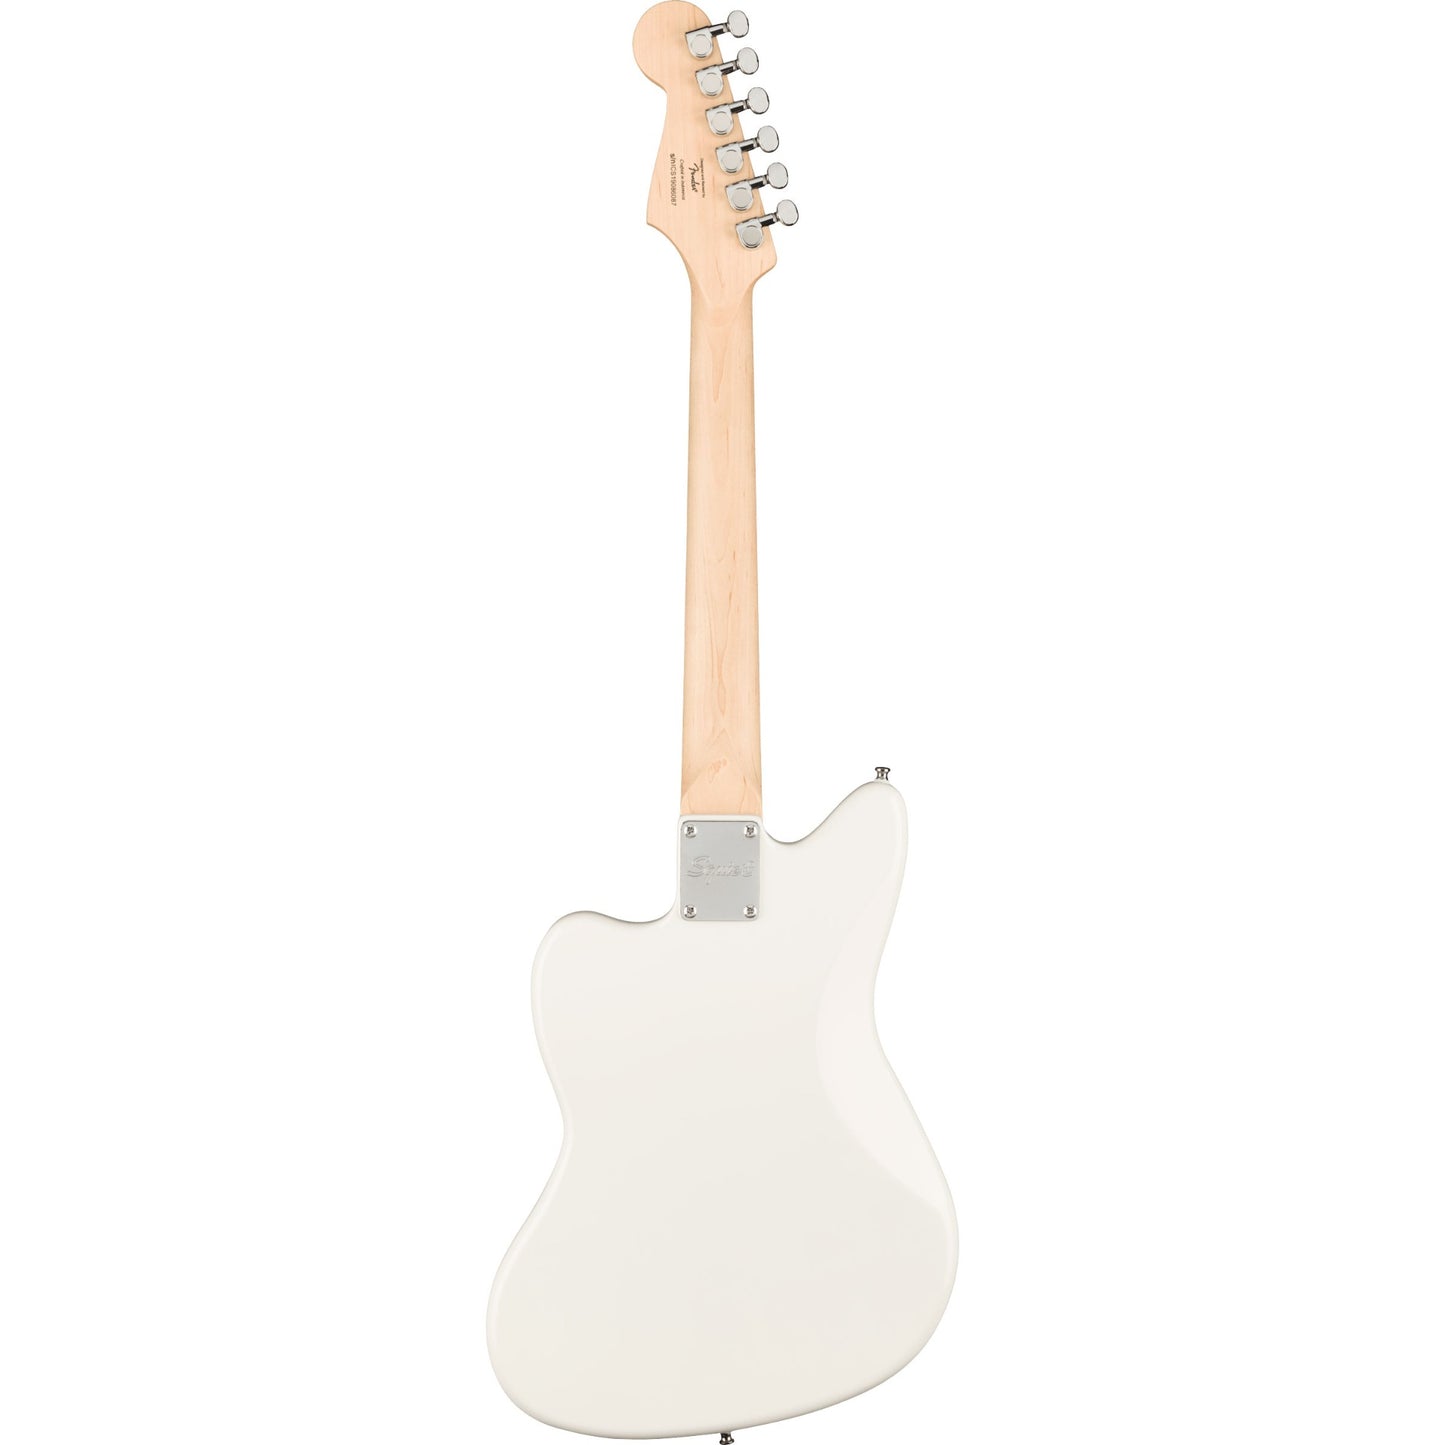 Squier Mini Jazzmaster HH Electric Guitar in Olympic White